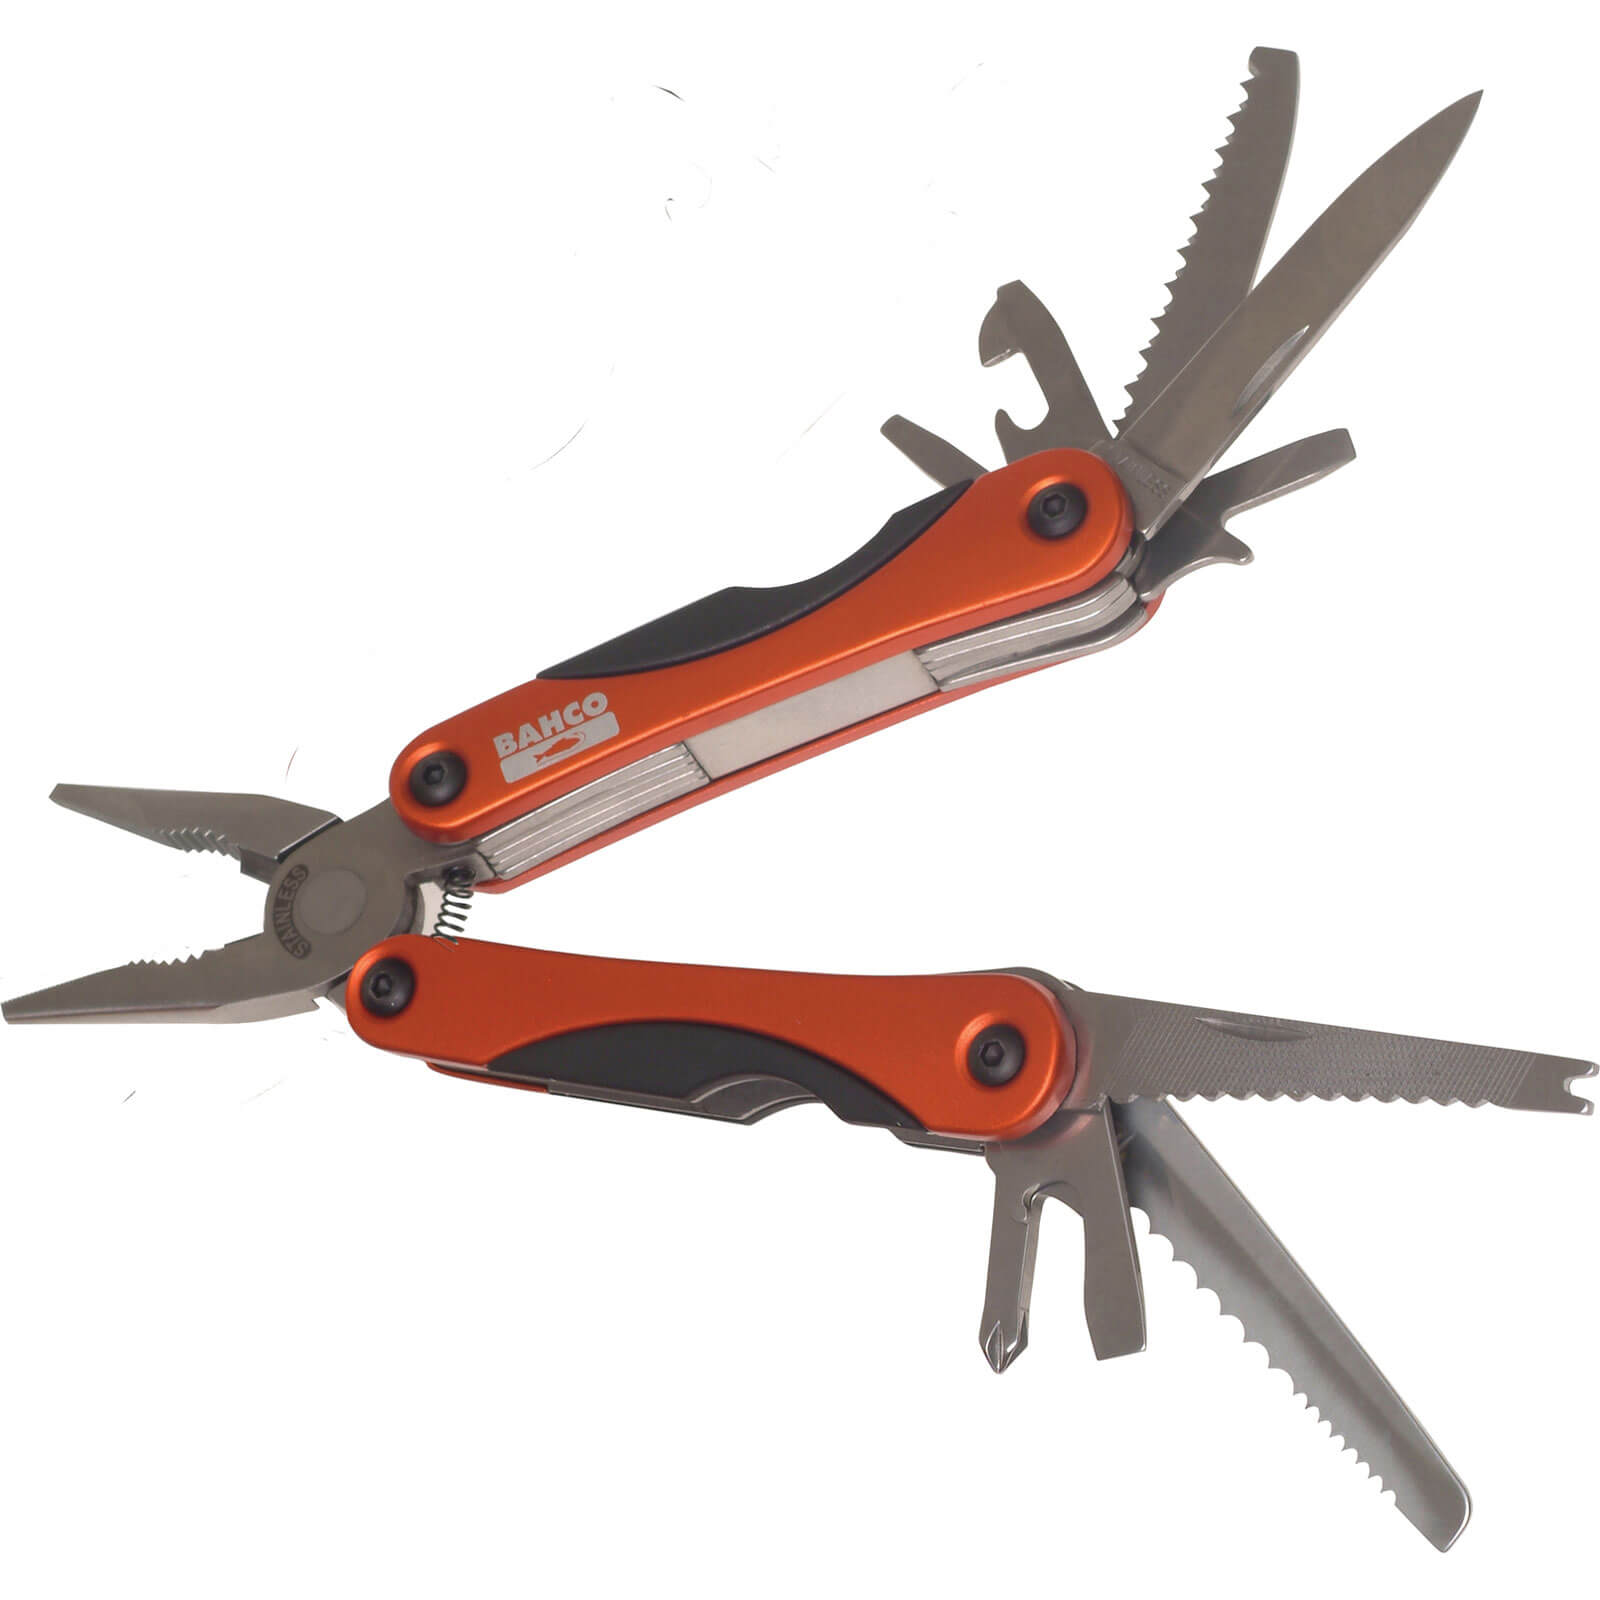 Bahco Aluminium Multi Tool with Stainless Steel Blades 18 Functions